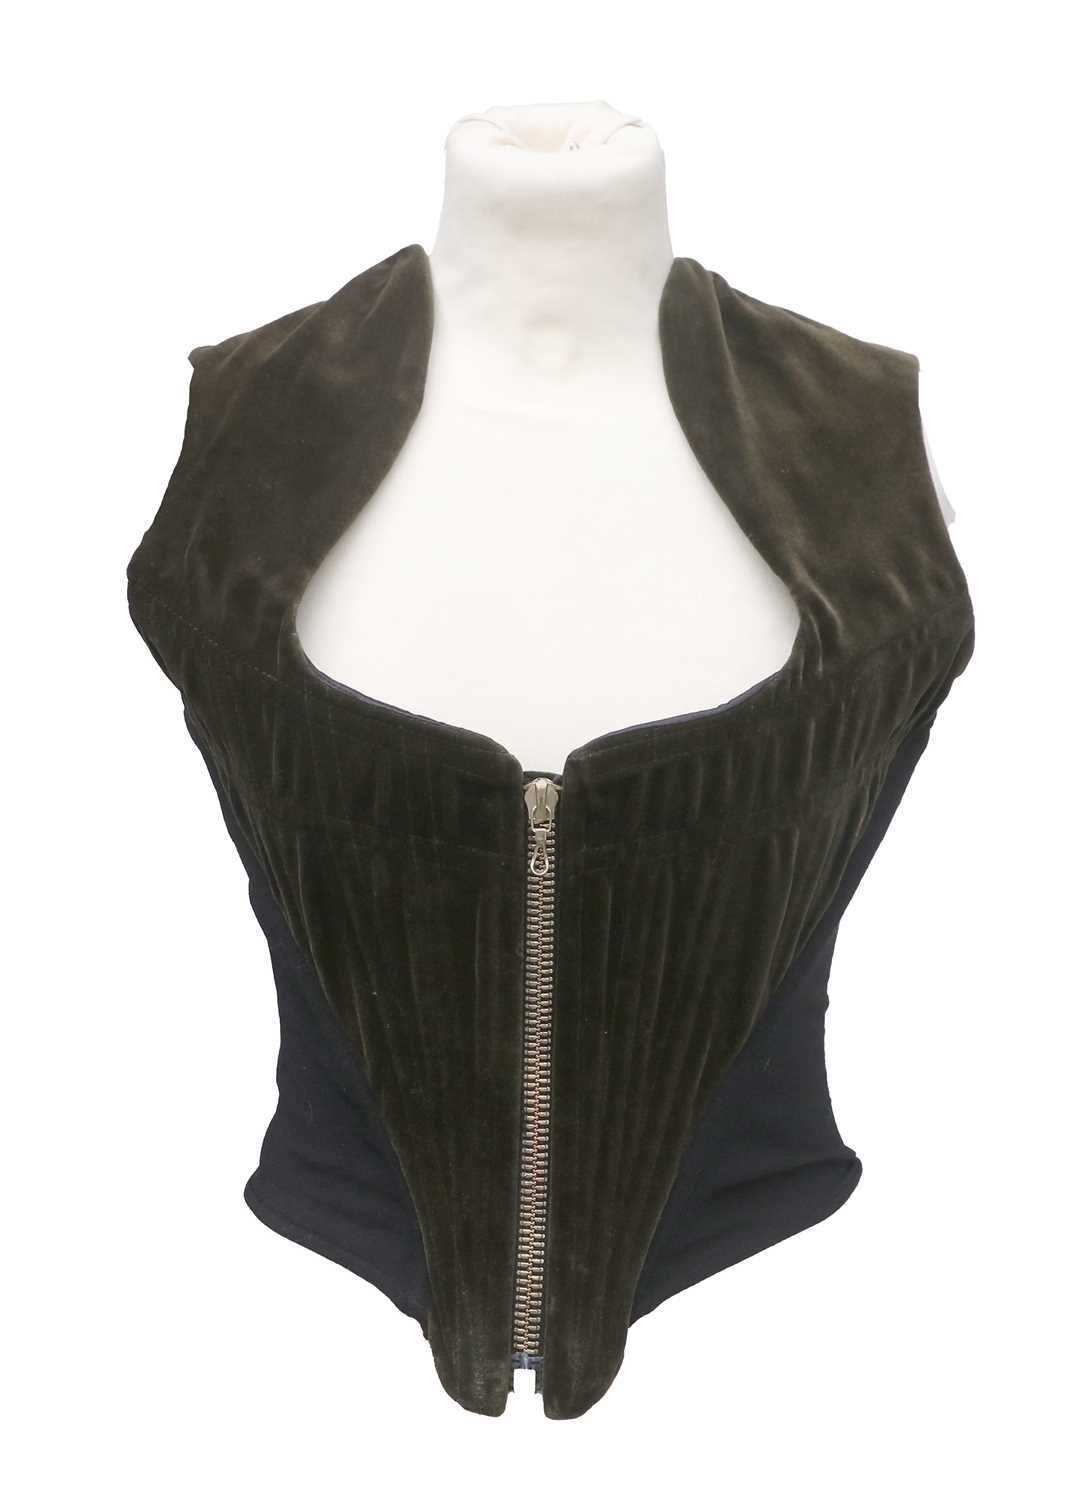 Circa 1990s Vivienne Westwood Couture London Windsor Green Velvet Corset, with central gilt metal